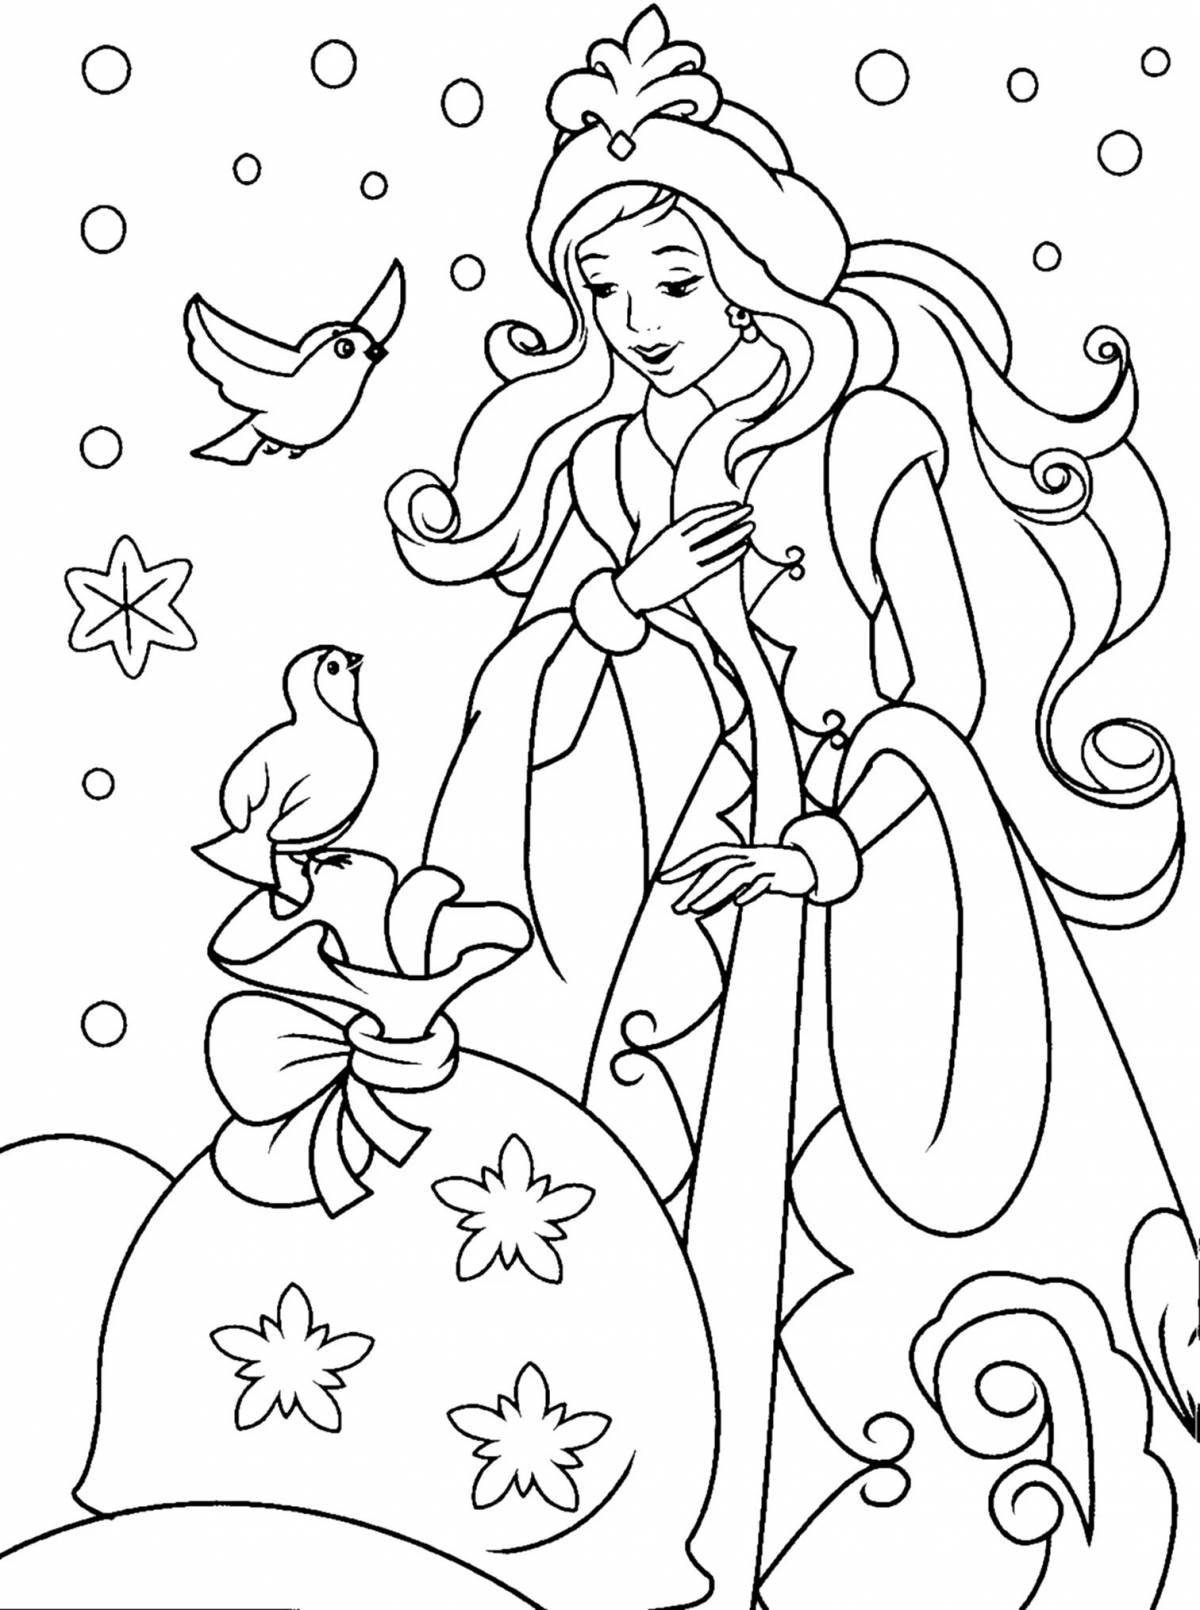 Snow Maiden's awesome coloring book